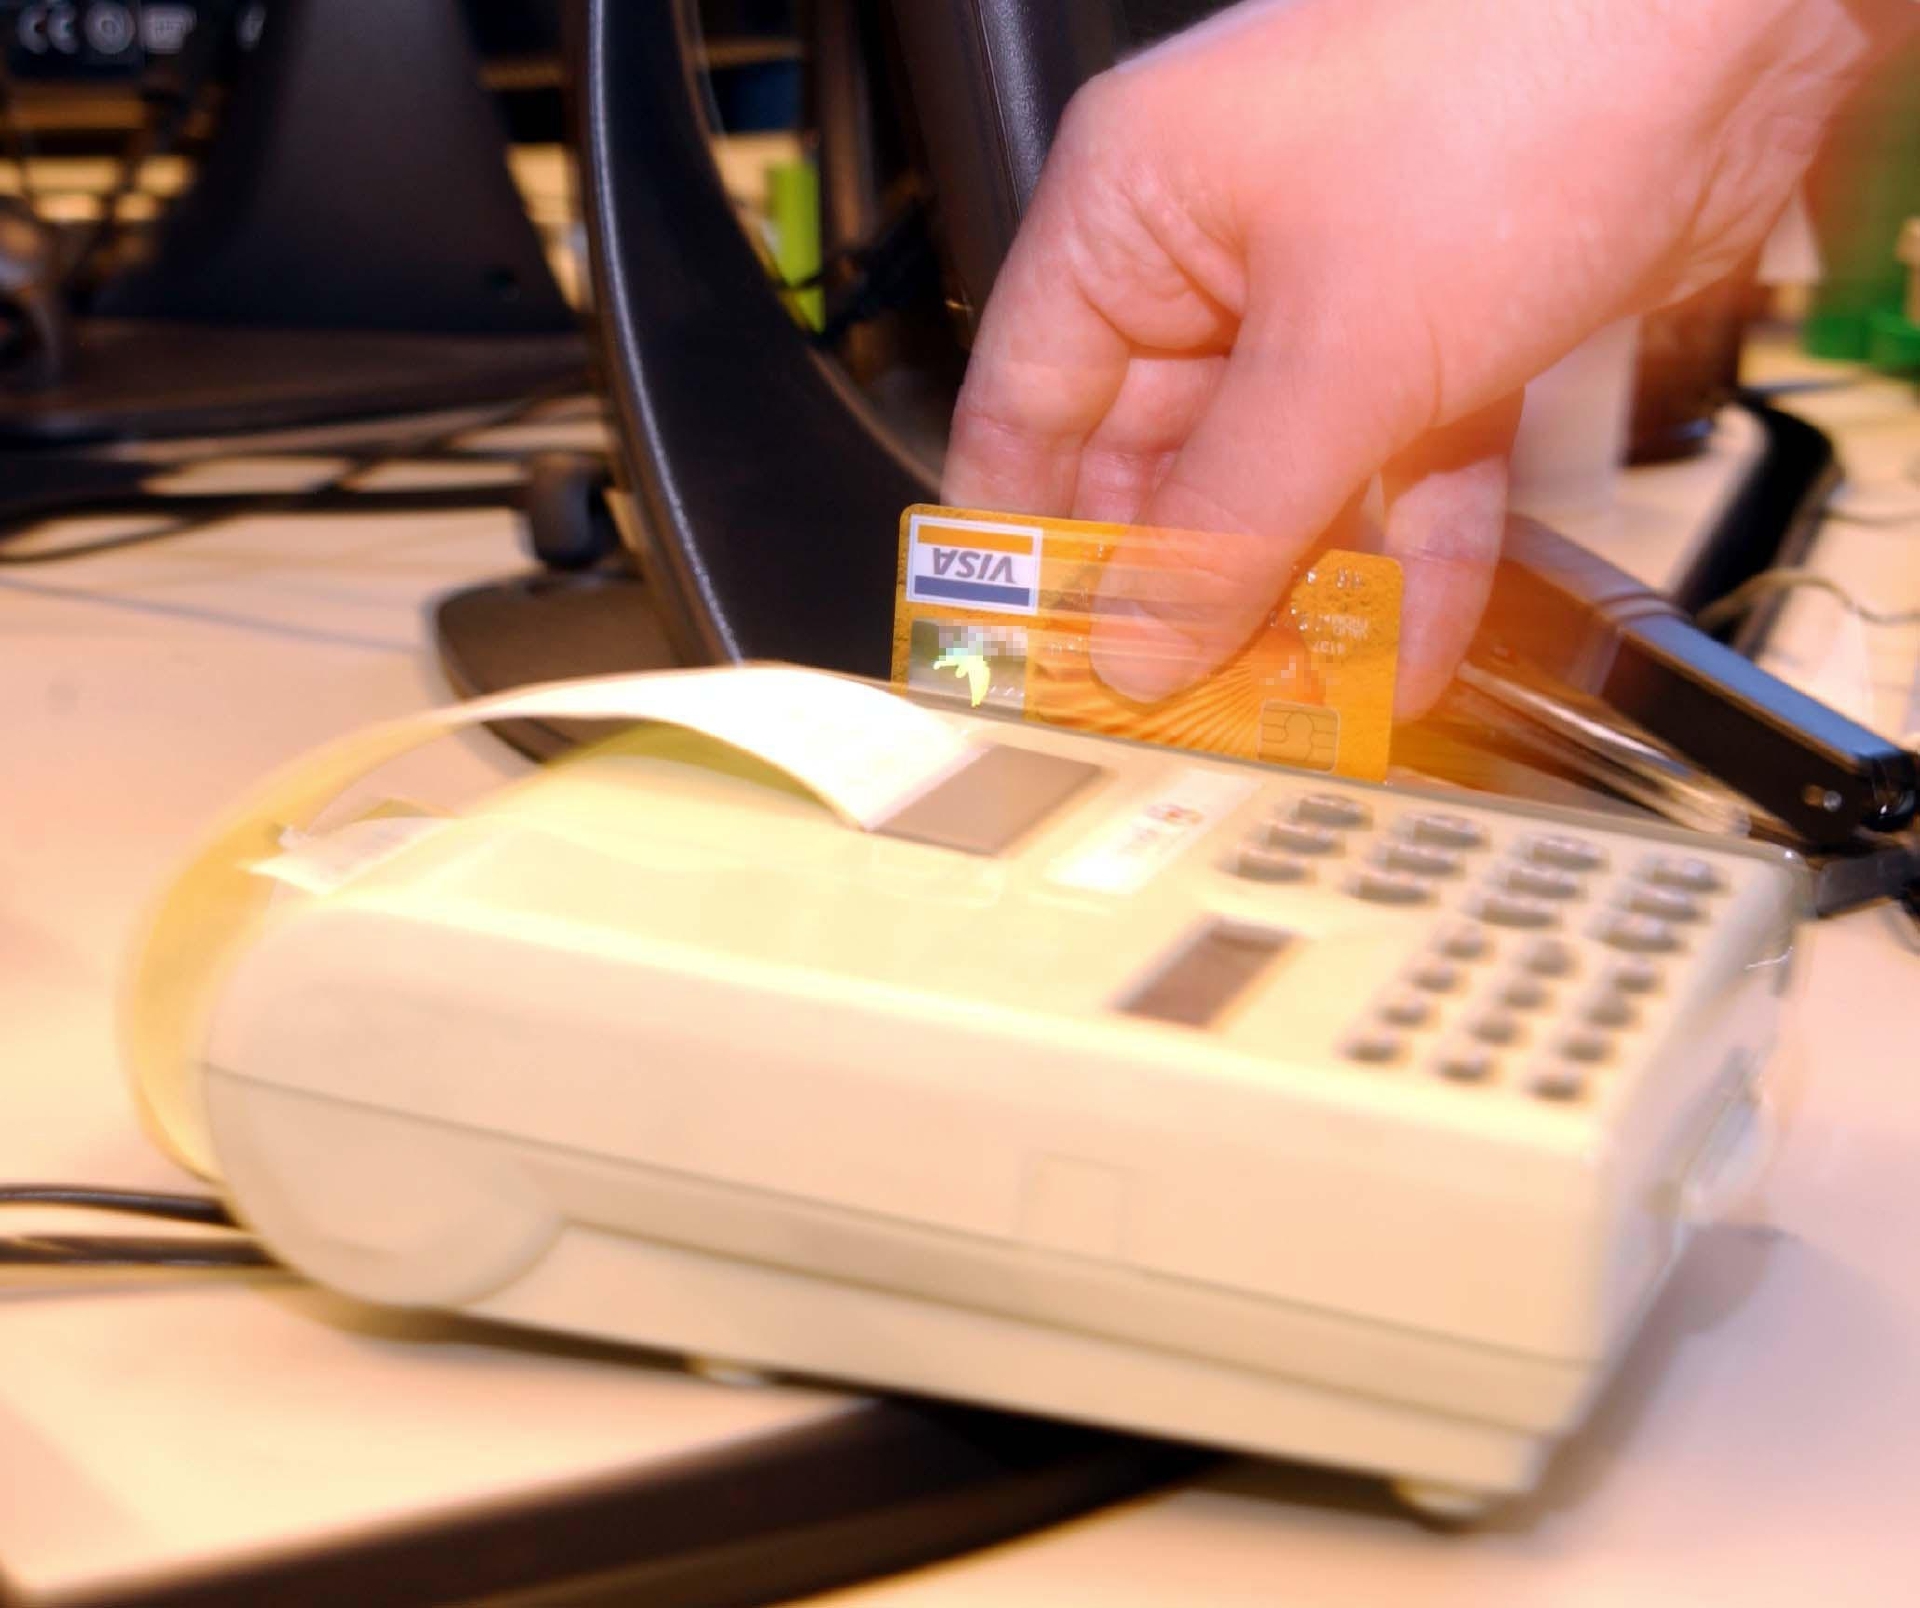 Clear2Pay Scotland in Dunfermline is at the centre of a growing global card payment market.